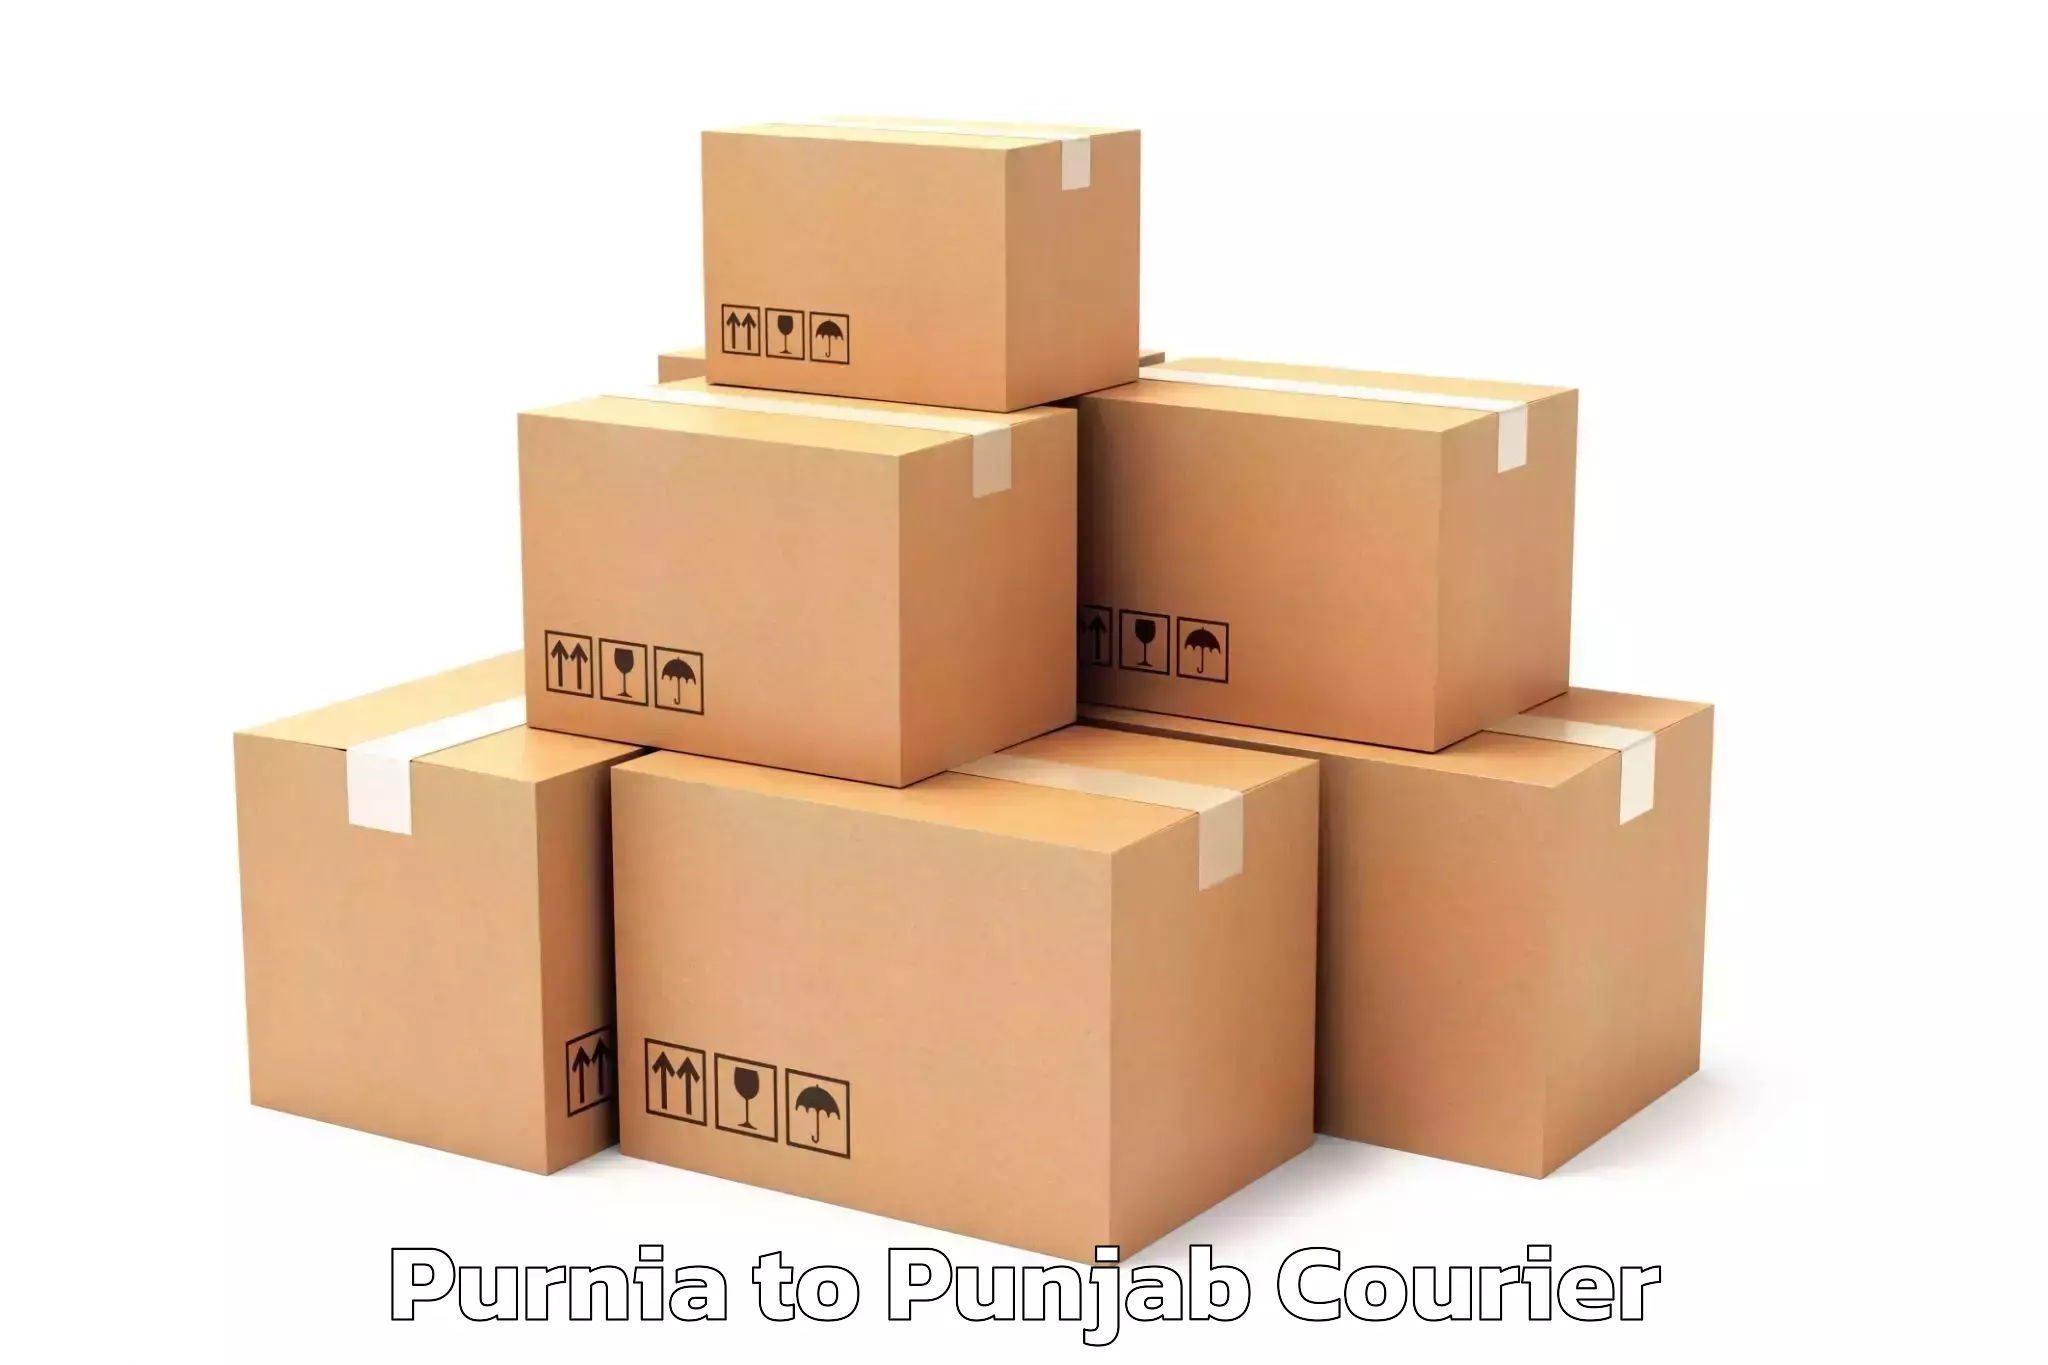 Moving and packing experts Purnia to Punjab